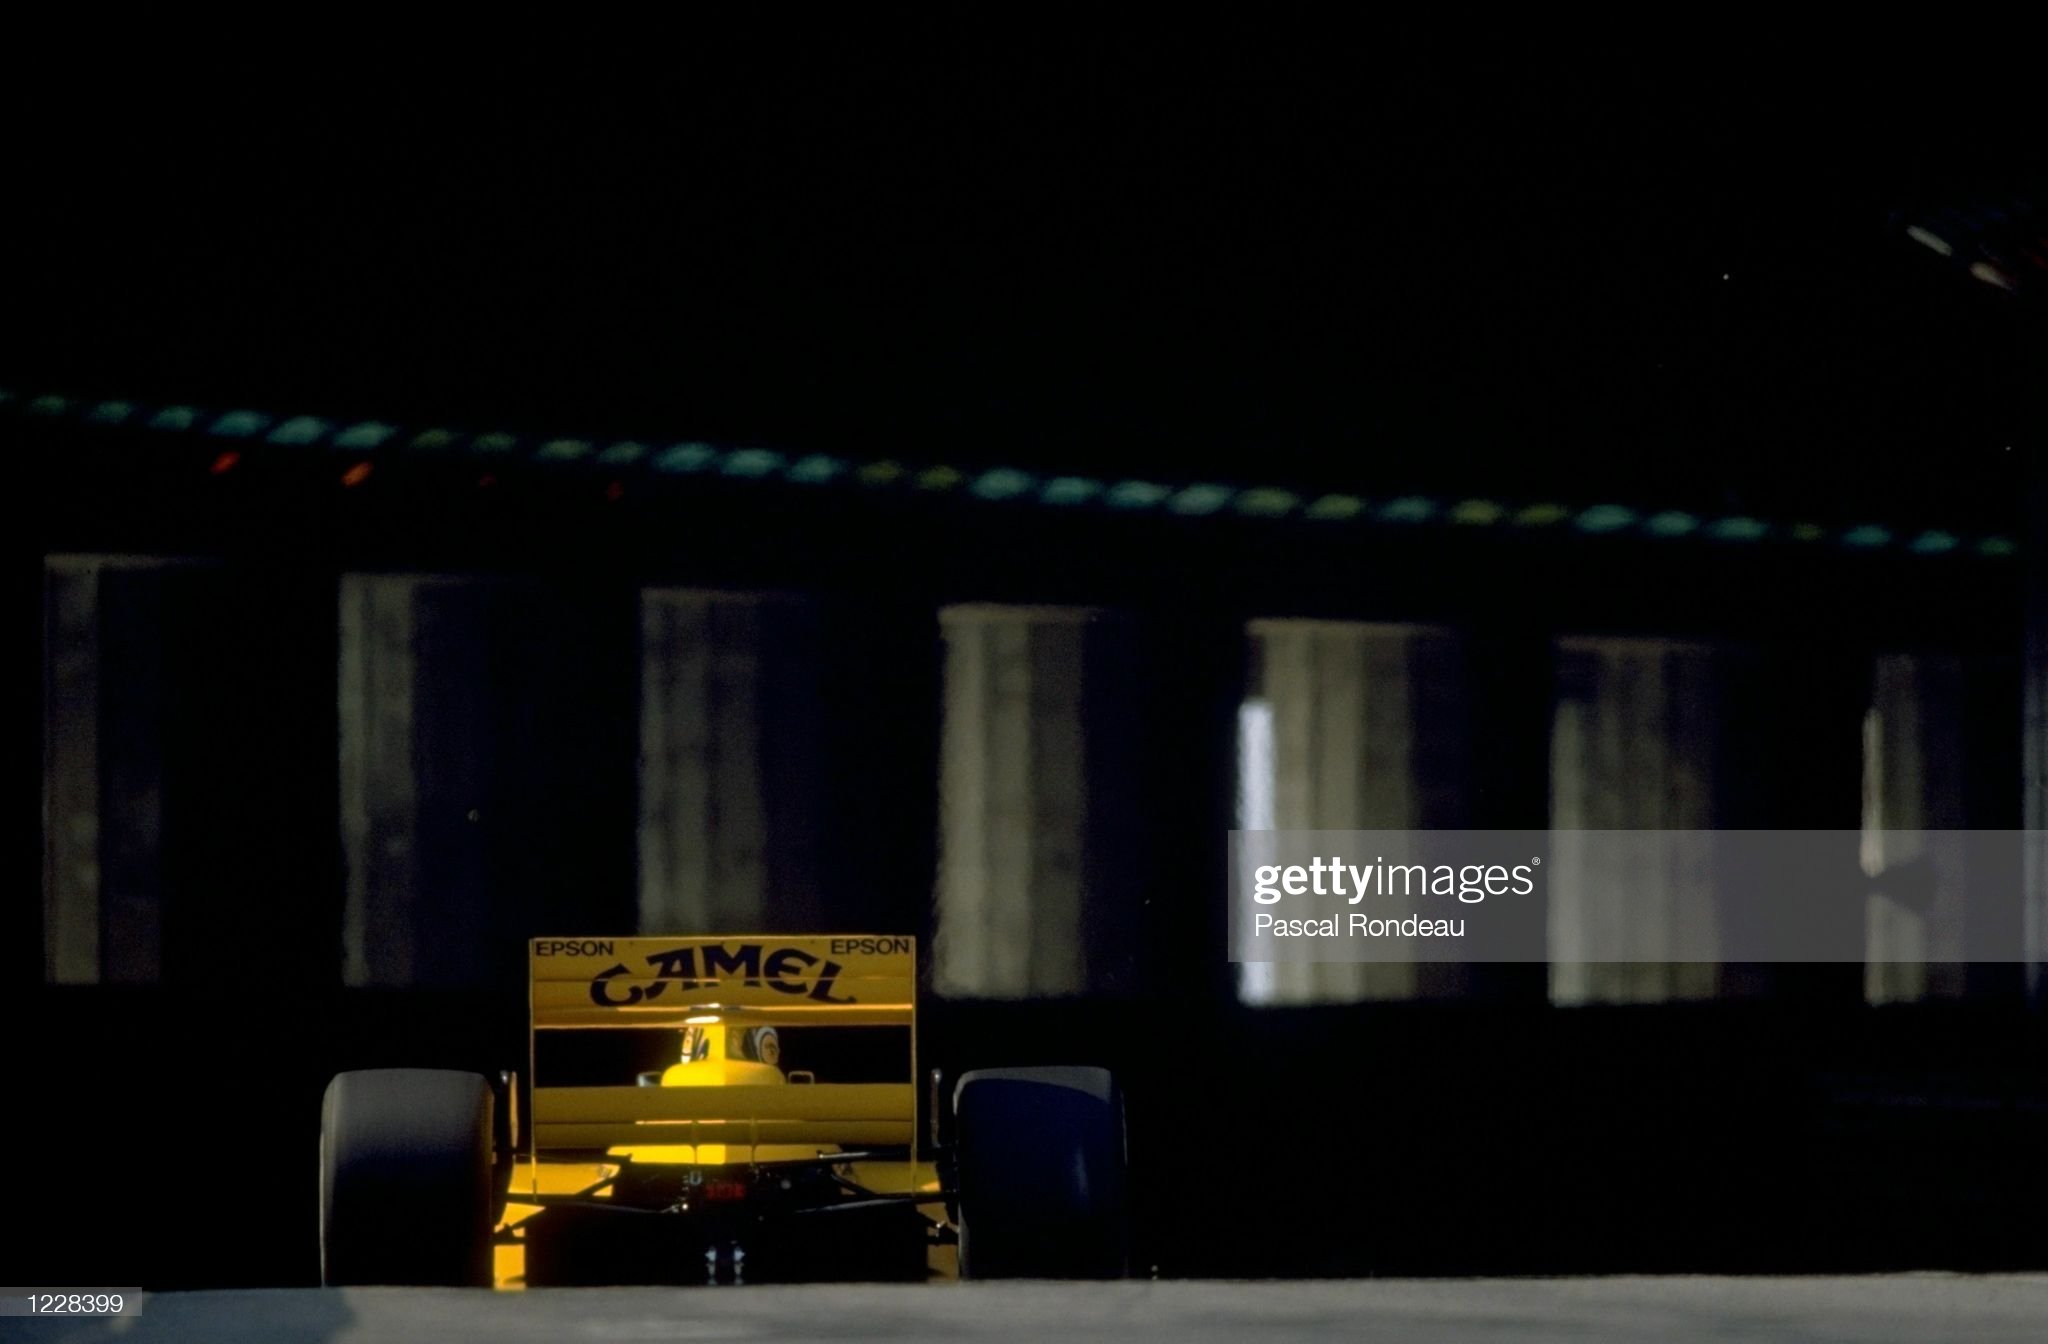 Rear view of Nelson Piquet of Brazil as he enters the tunnel in his Lotus Judd during the Monaco Grand Prix in 1989.